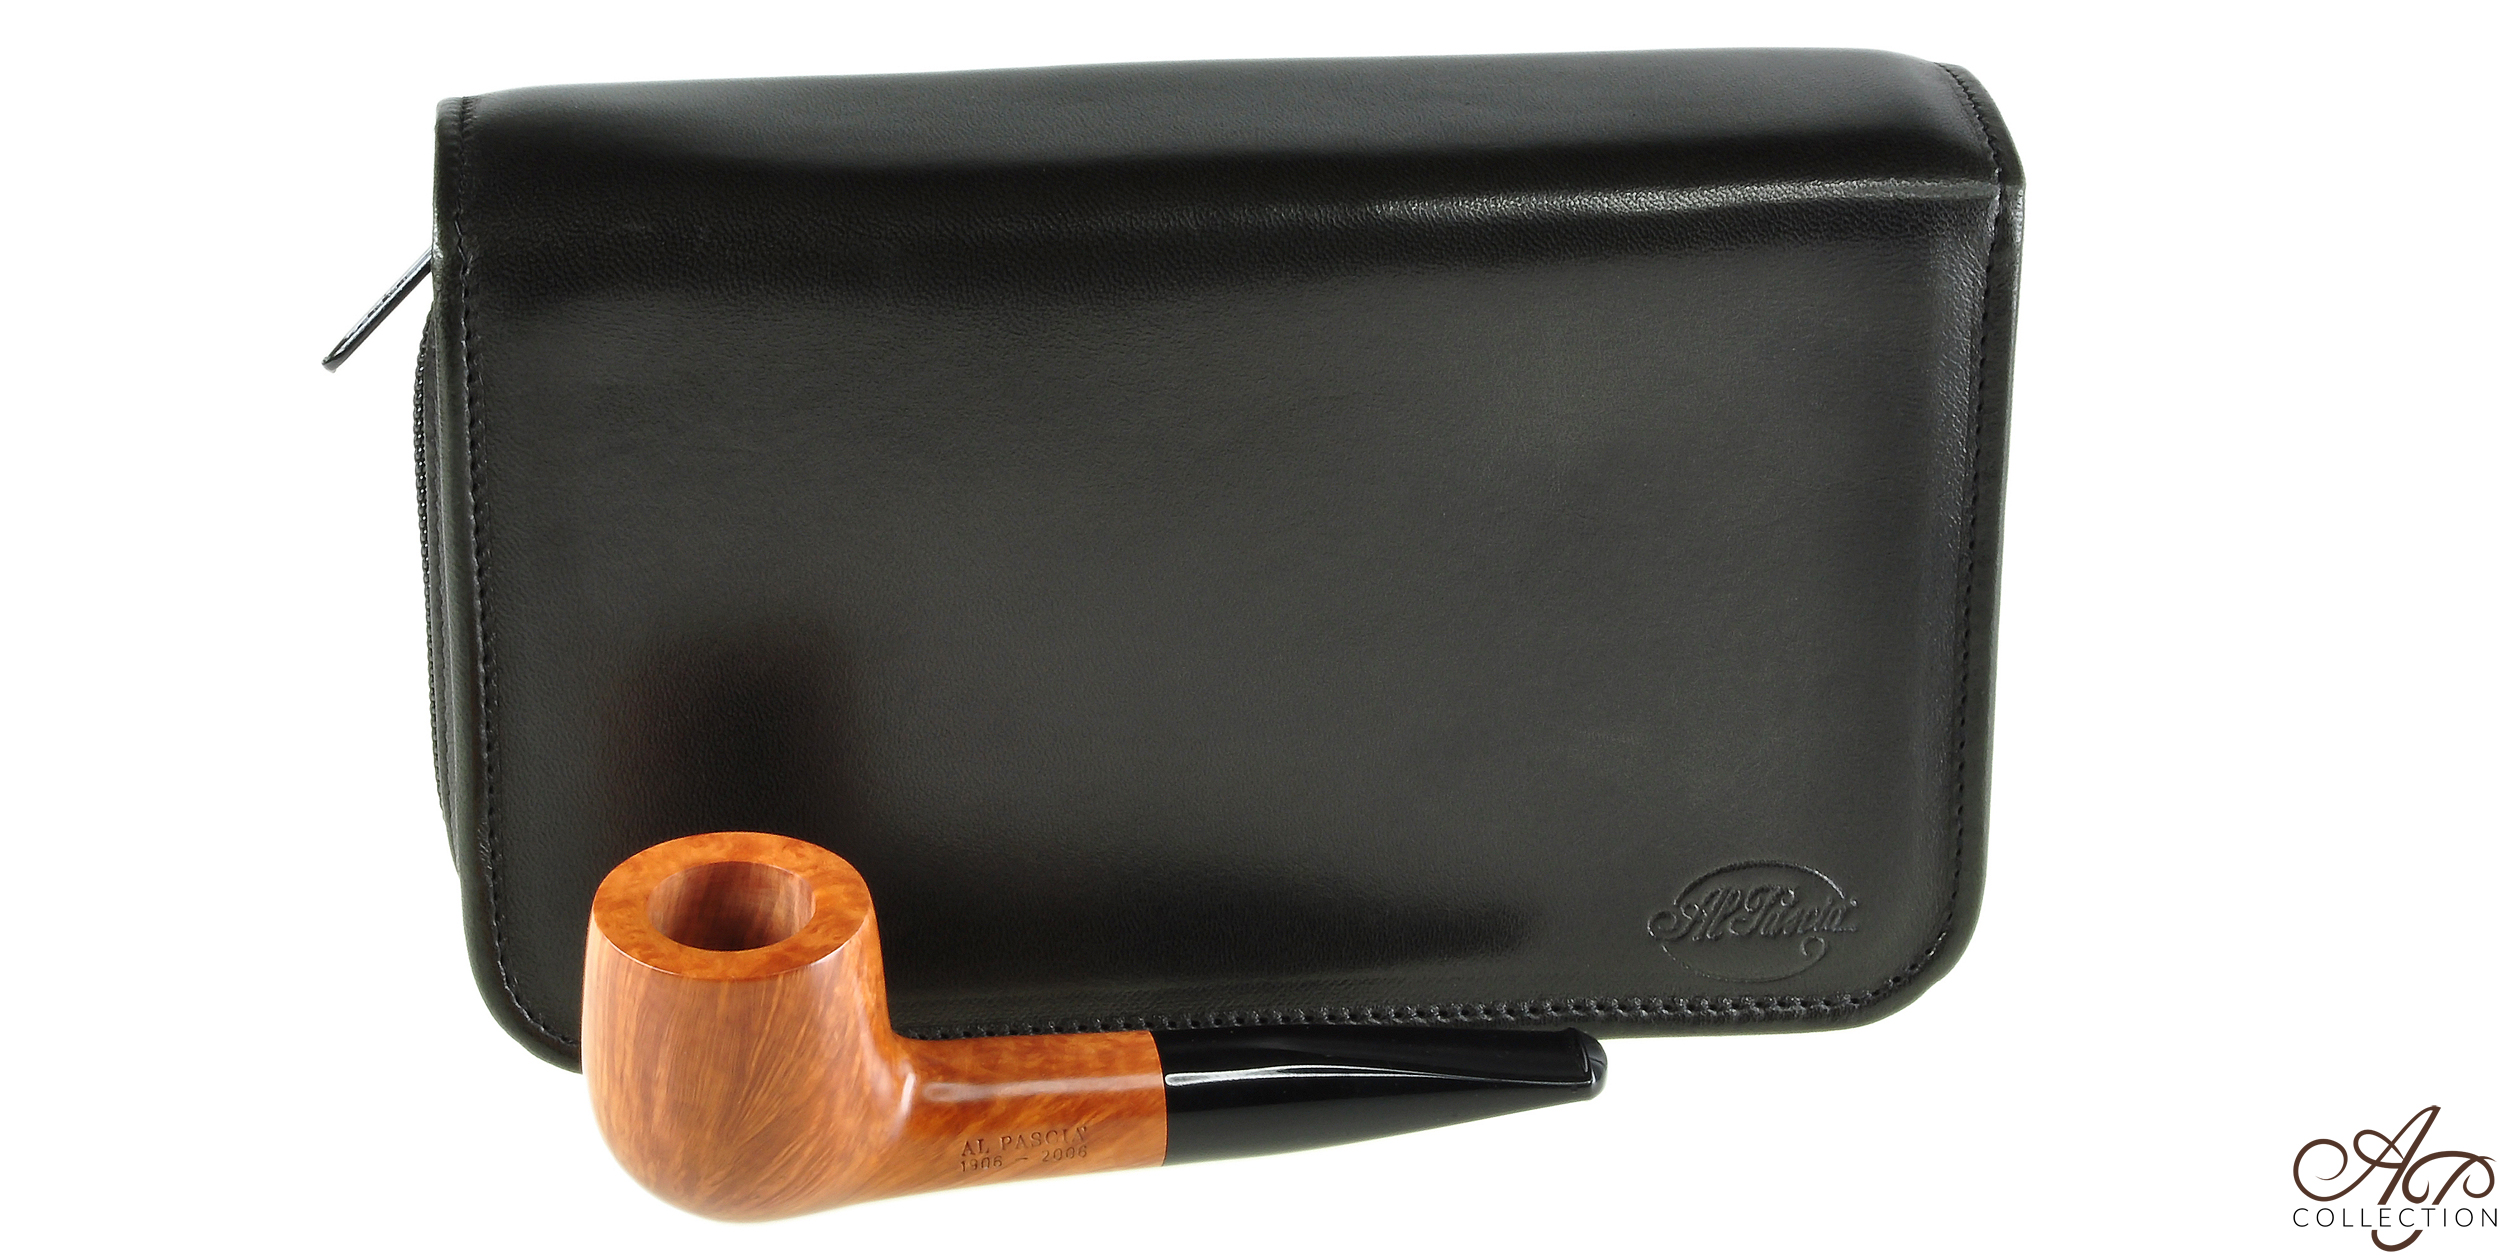 Al Pascià - Leather pipe and tobacco bags hand made in Italy - P